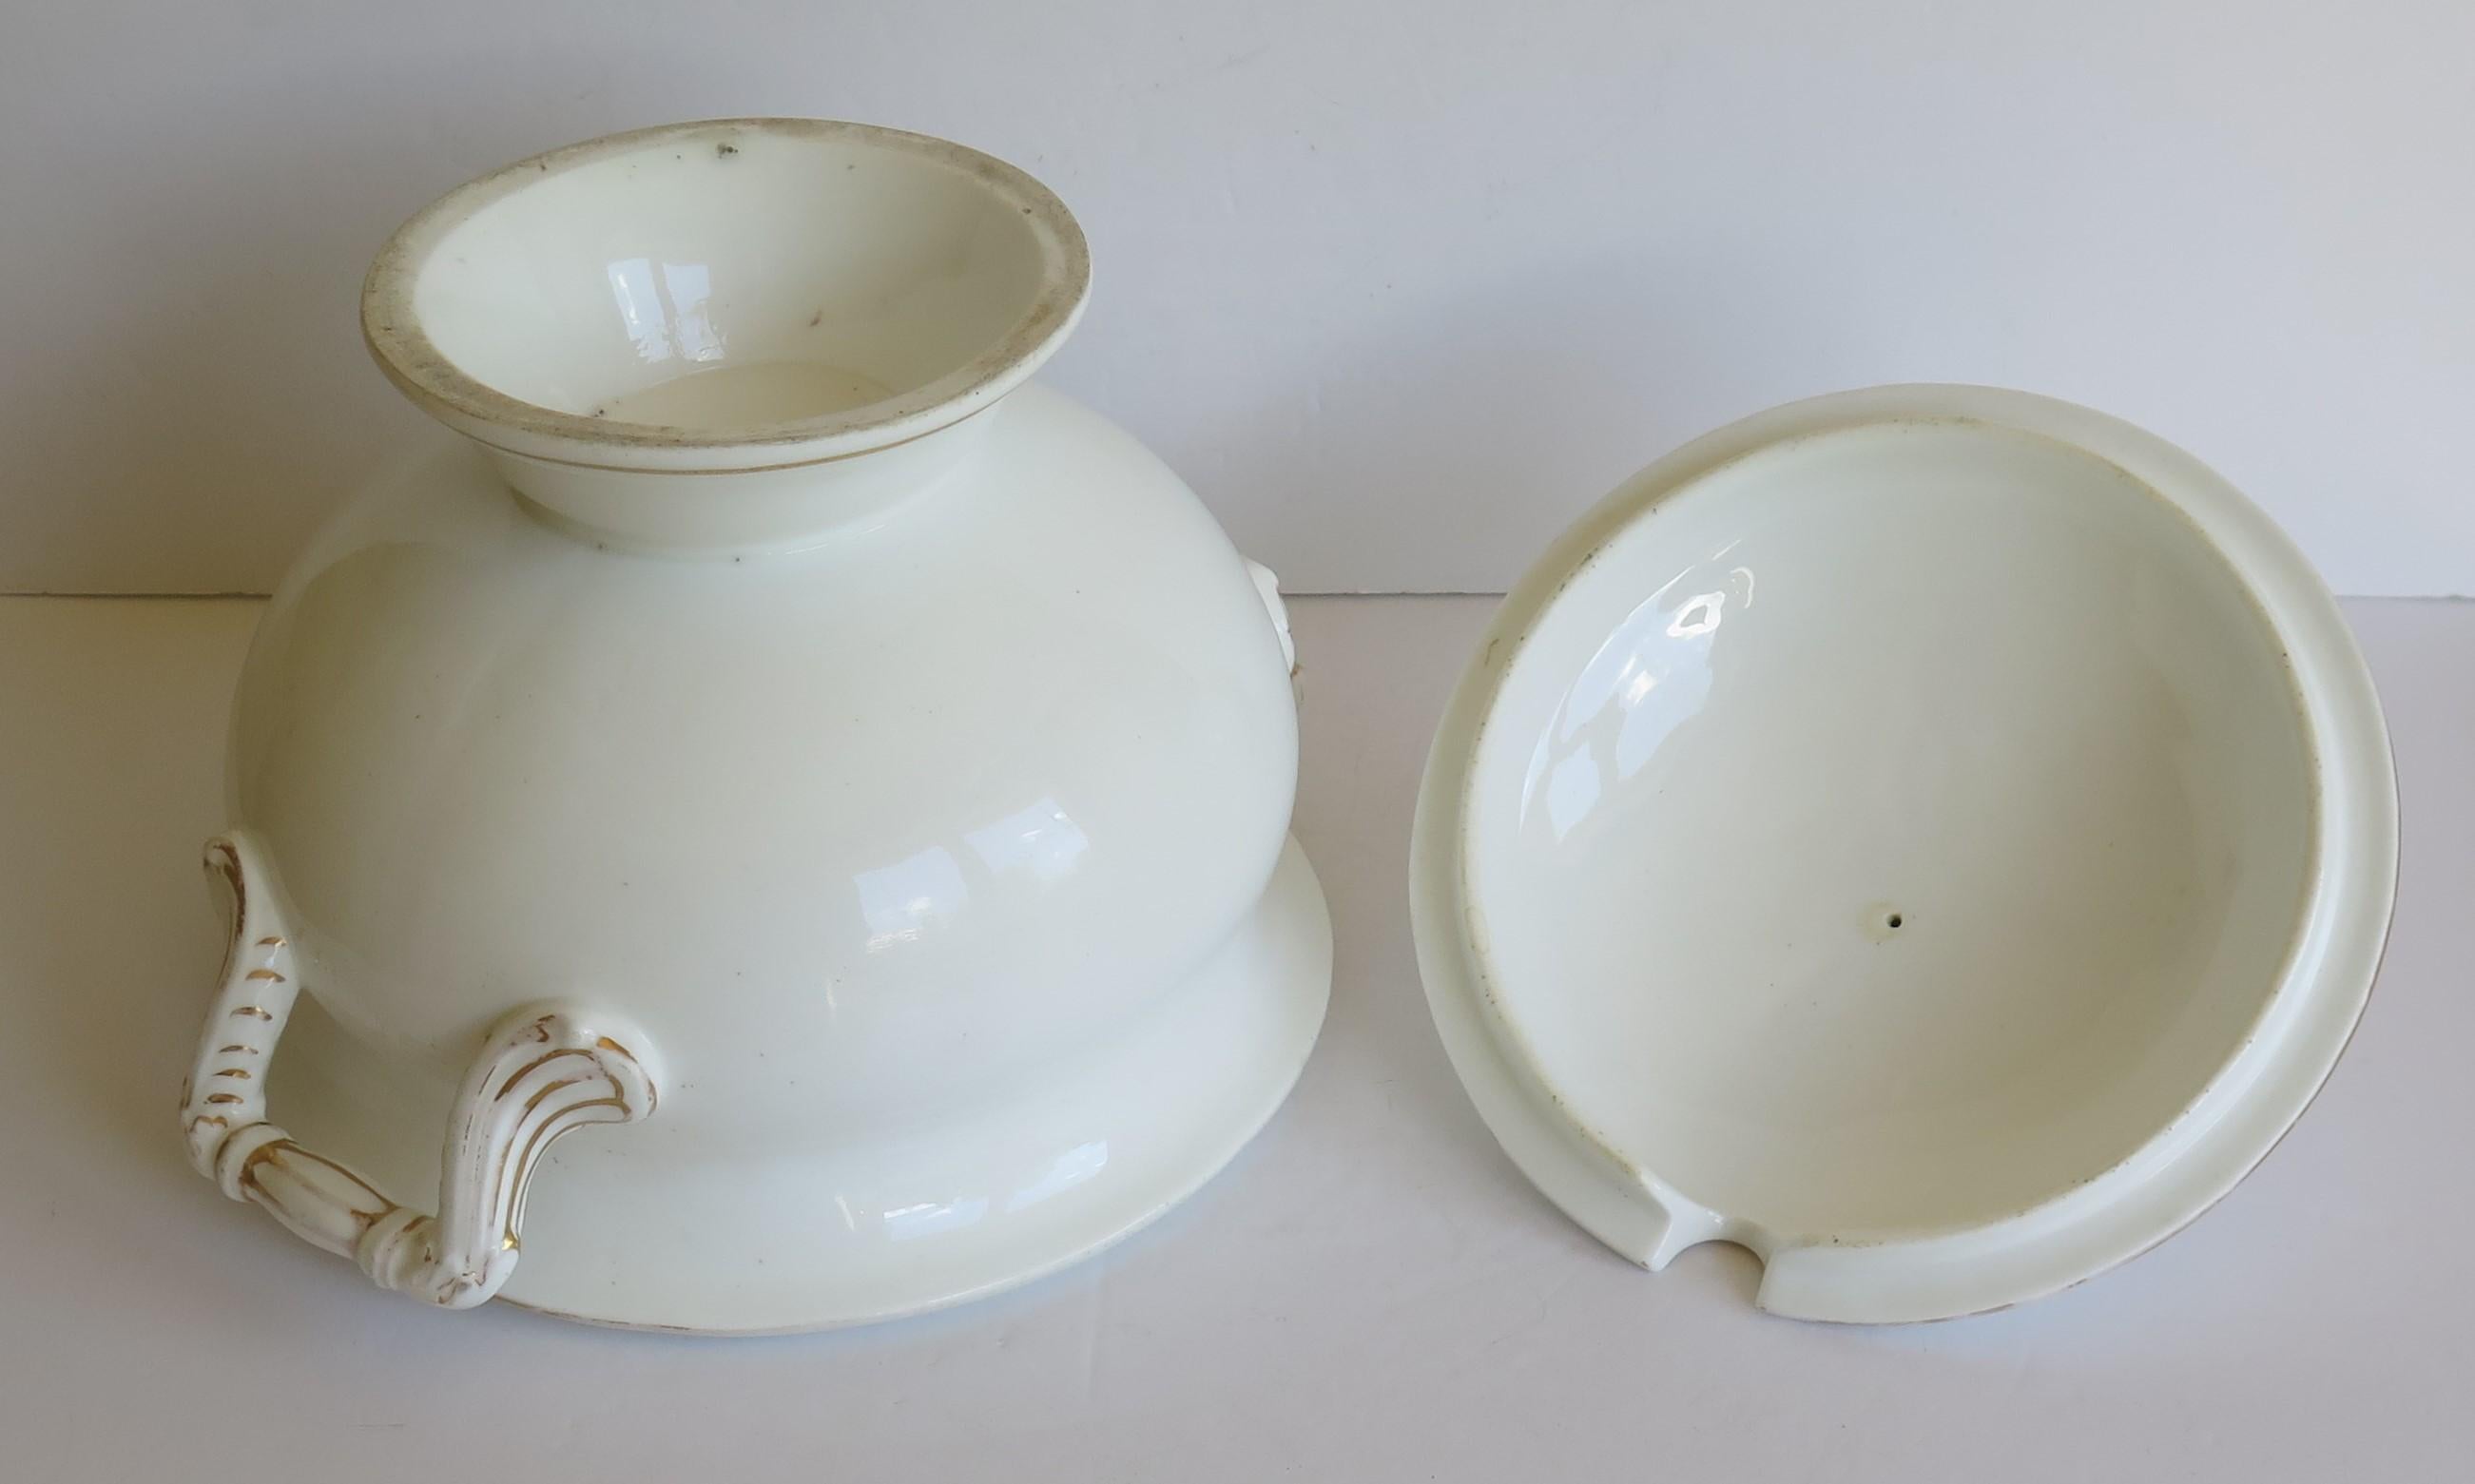 Large 19th Century Porcelain Tureen Gilded Moulded Handles & Rose Knop to Lid For Sale 11